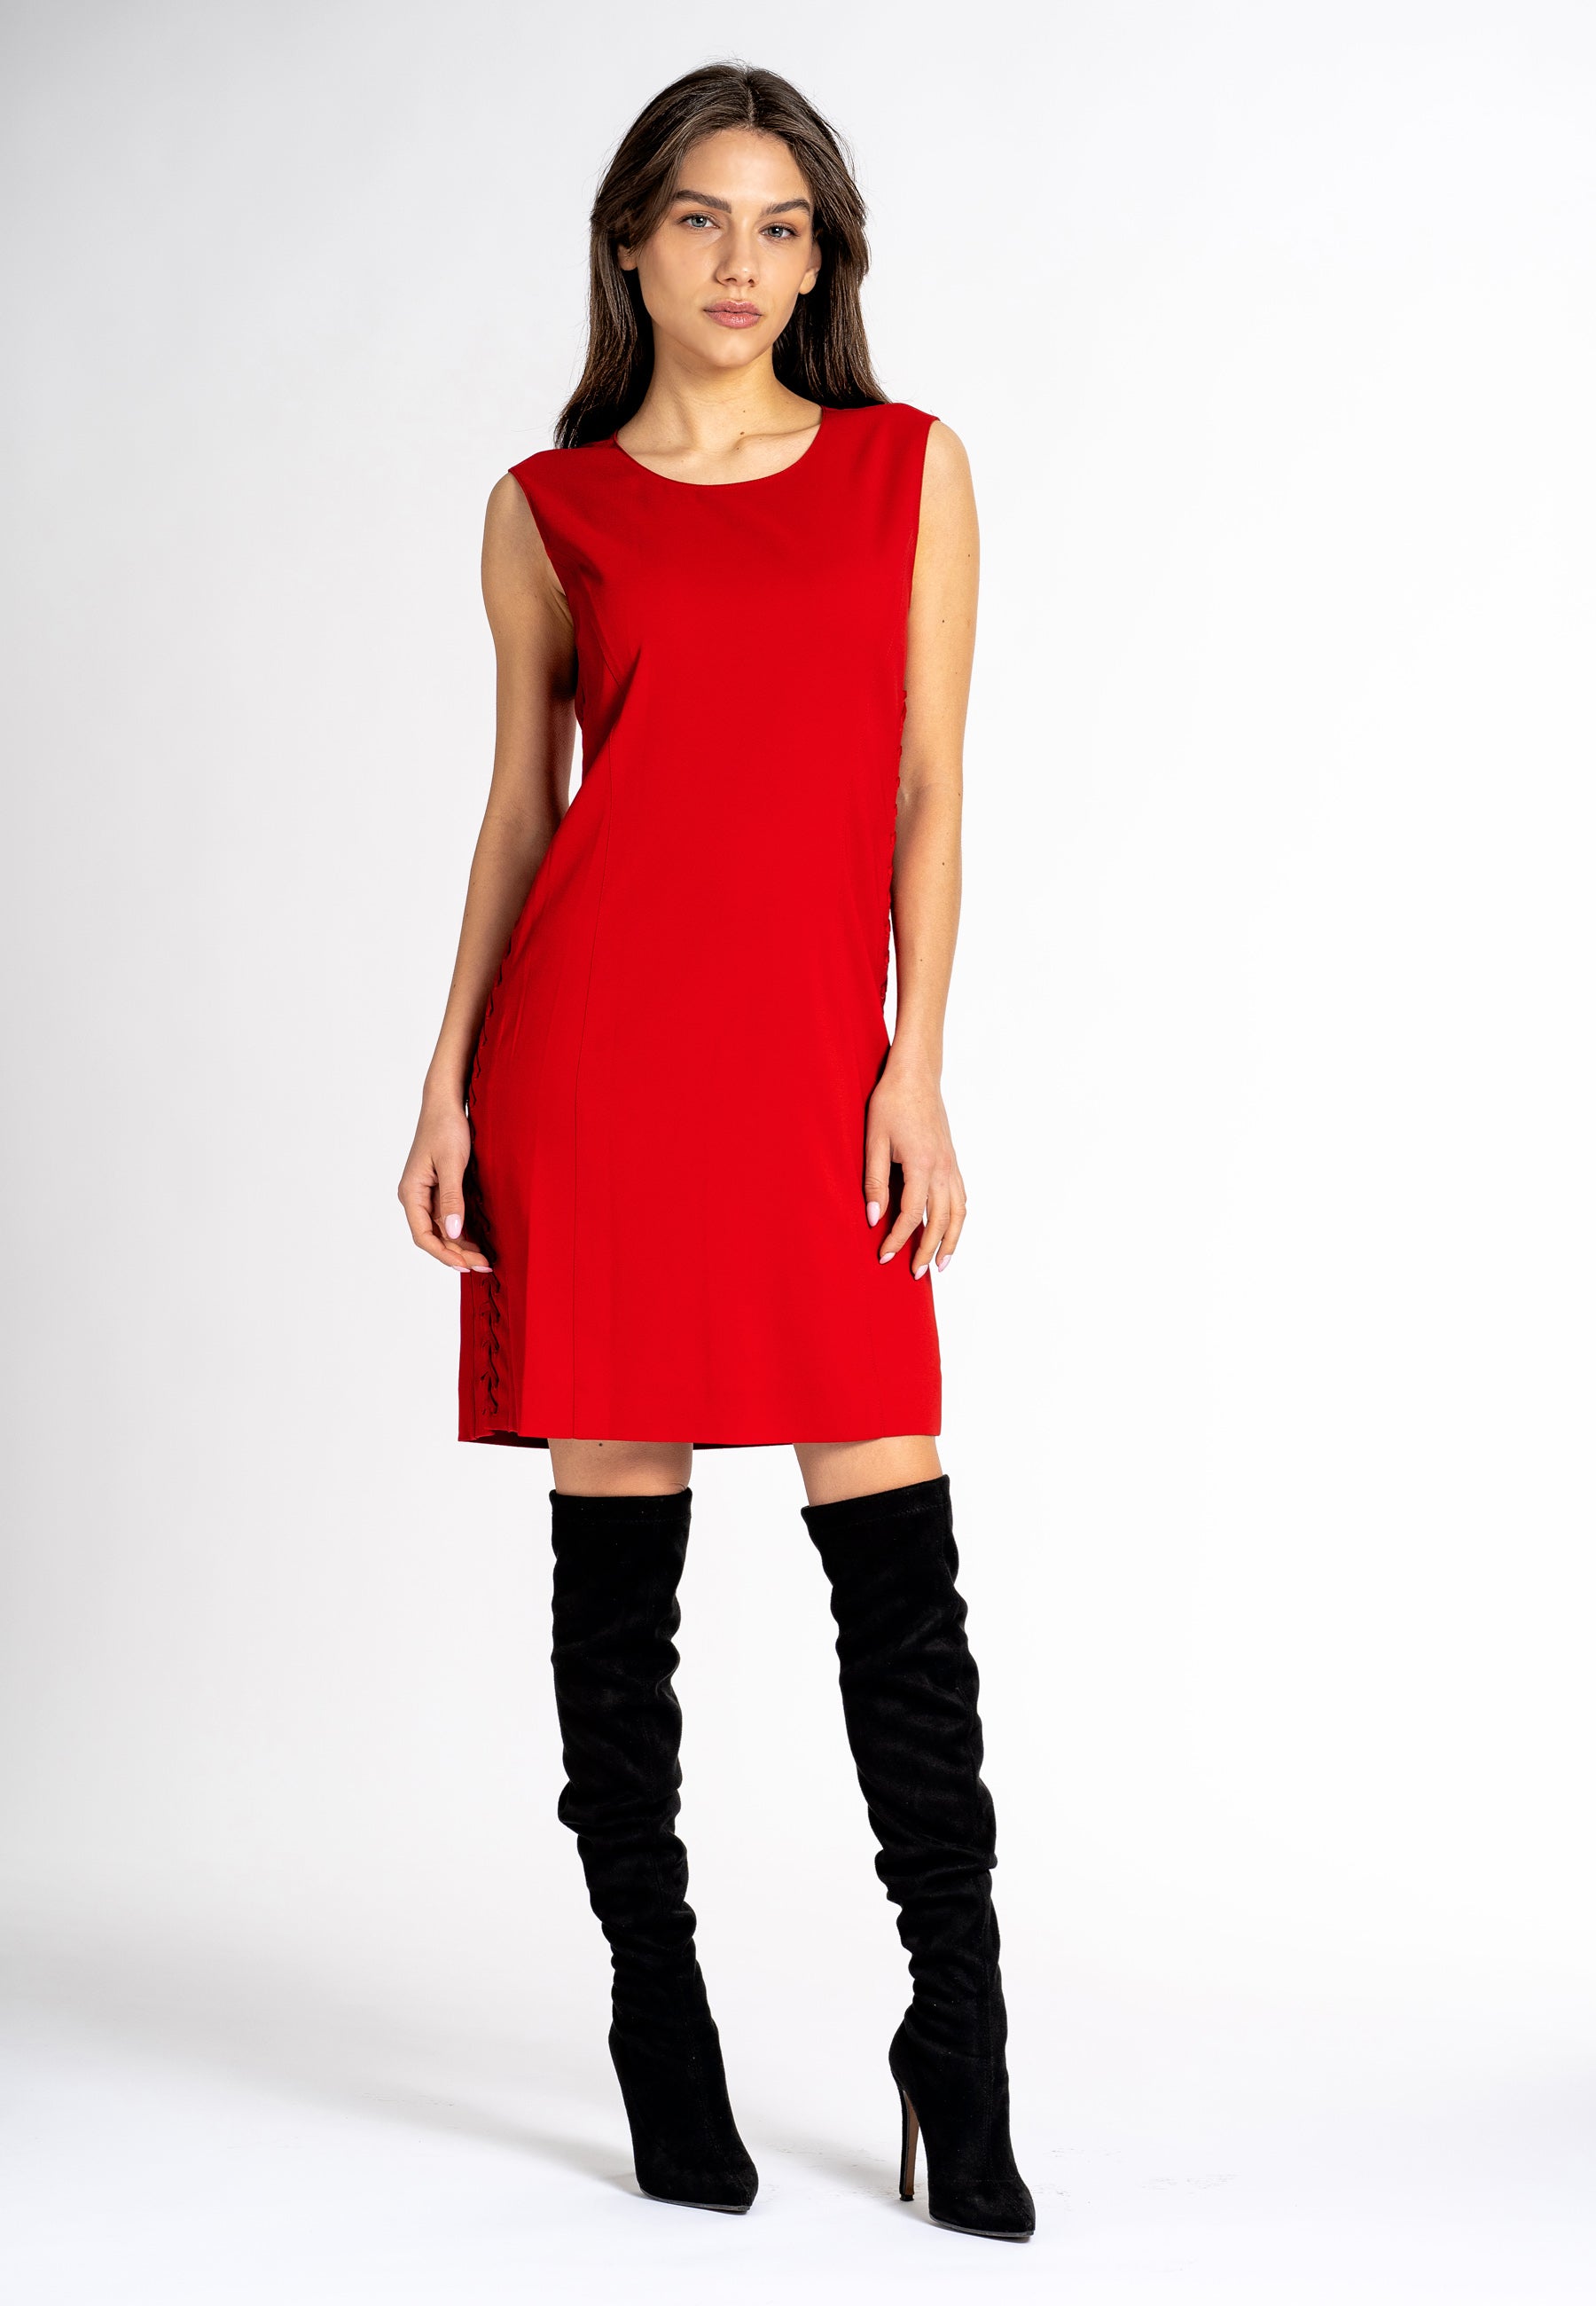 sustainable dresses australia  red dress with side laces  Side slotted sheath dress sheath dress australia sheathdress red women cut out dress  red dress  made in italy clothing designer dress  italian design dresses Red side lace Red mide dress  sleeveless red dress  red sleeveless dress winter dresses Australia 